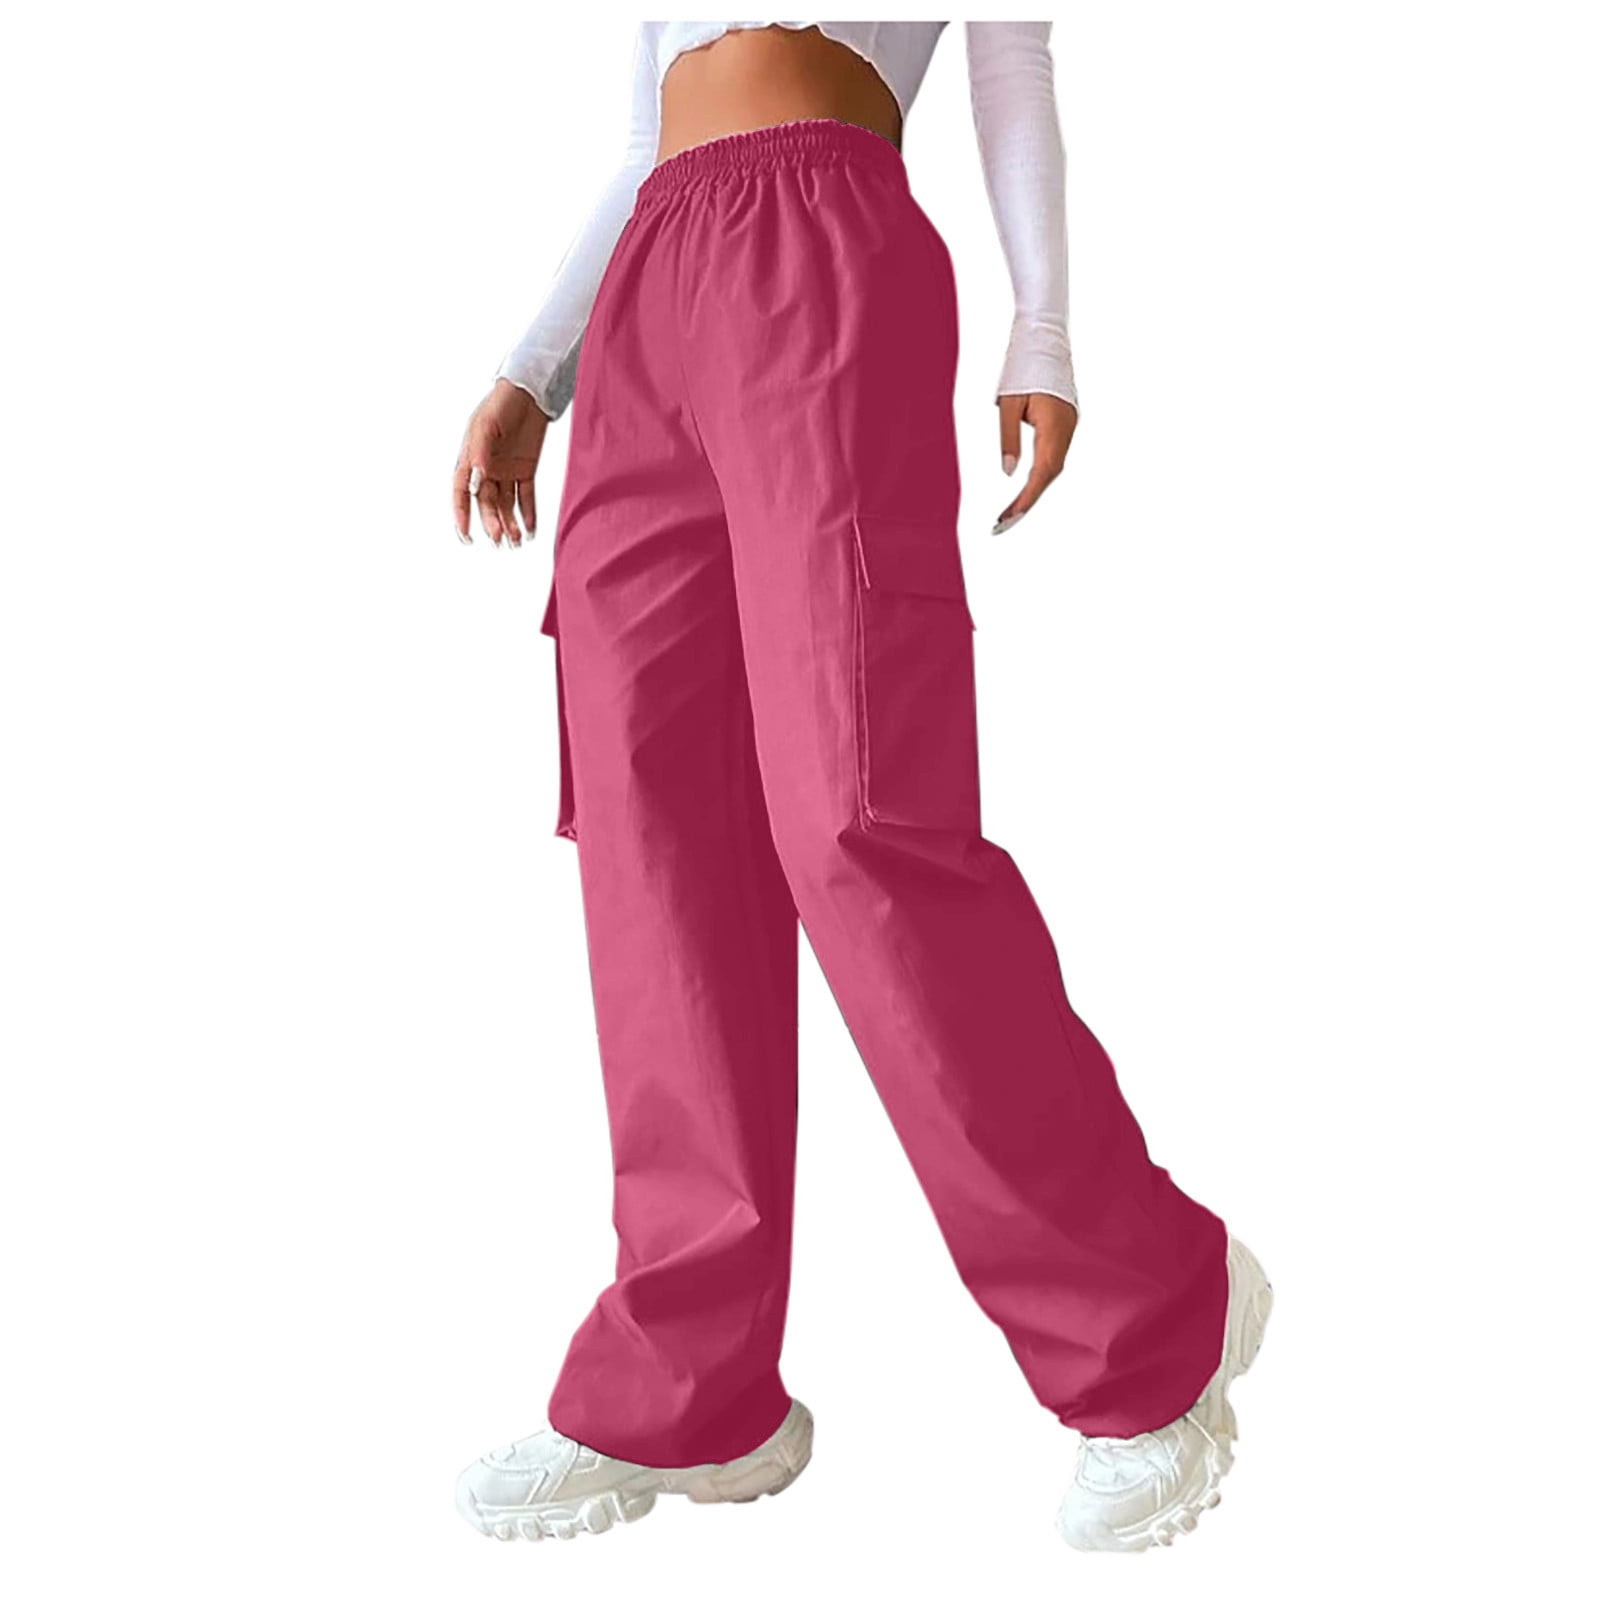 Jones New York Sport Bright Pink Cargo Pants Roll Up Capris Size 10 NEW NWT  Y2K